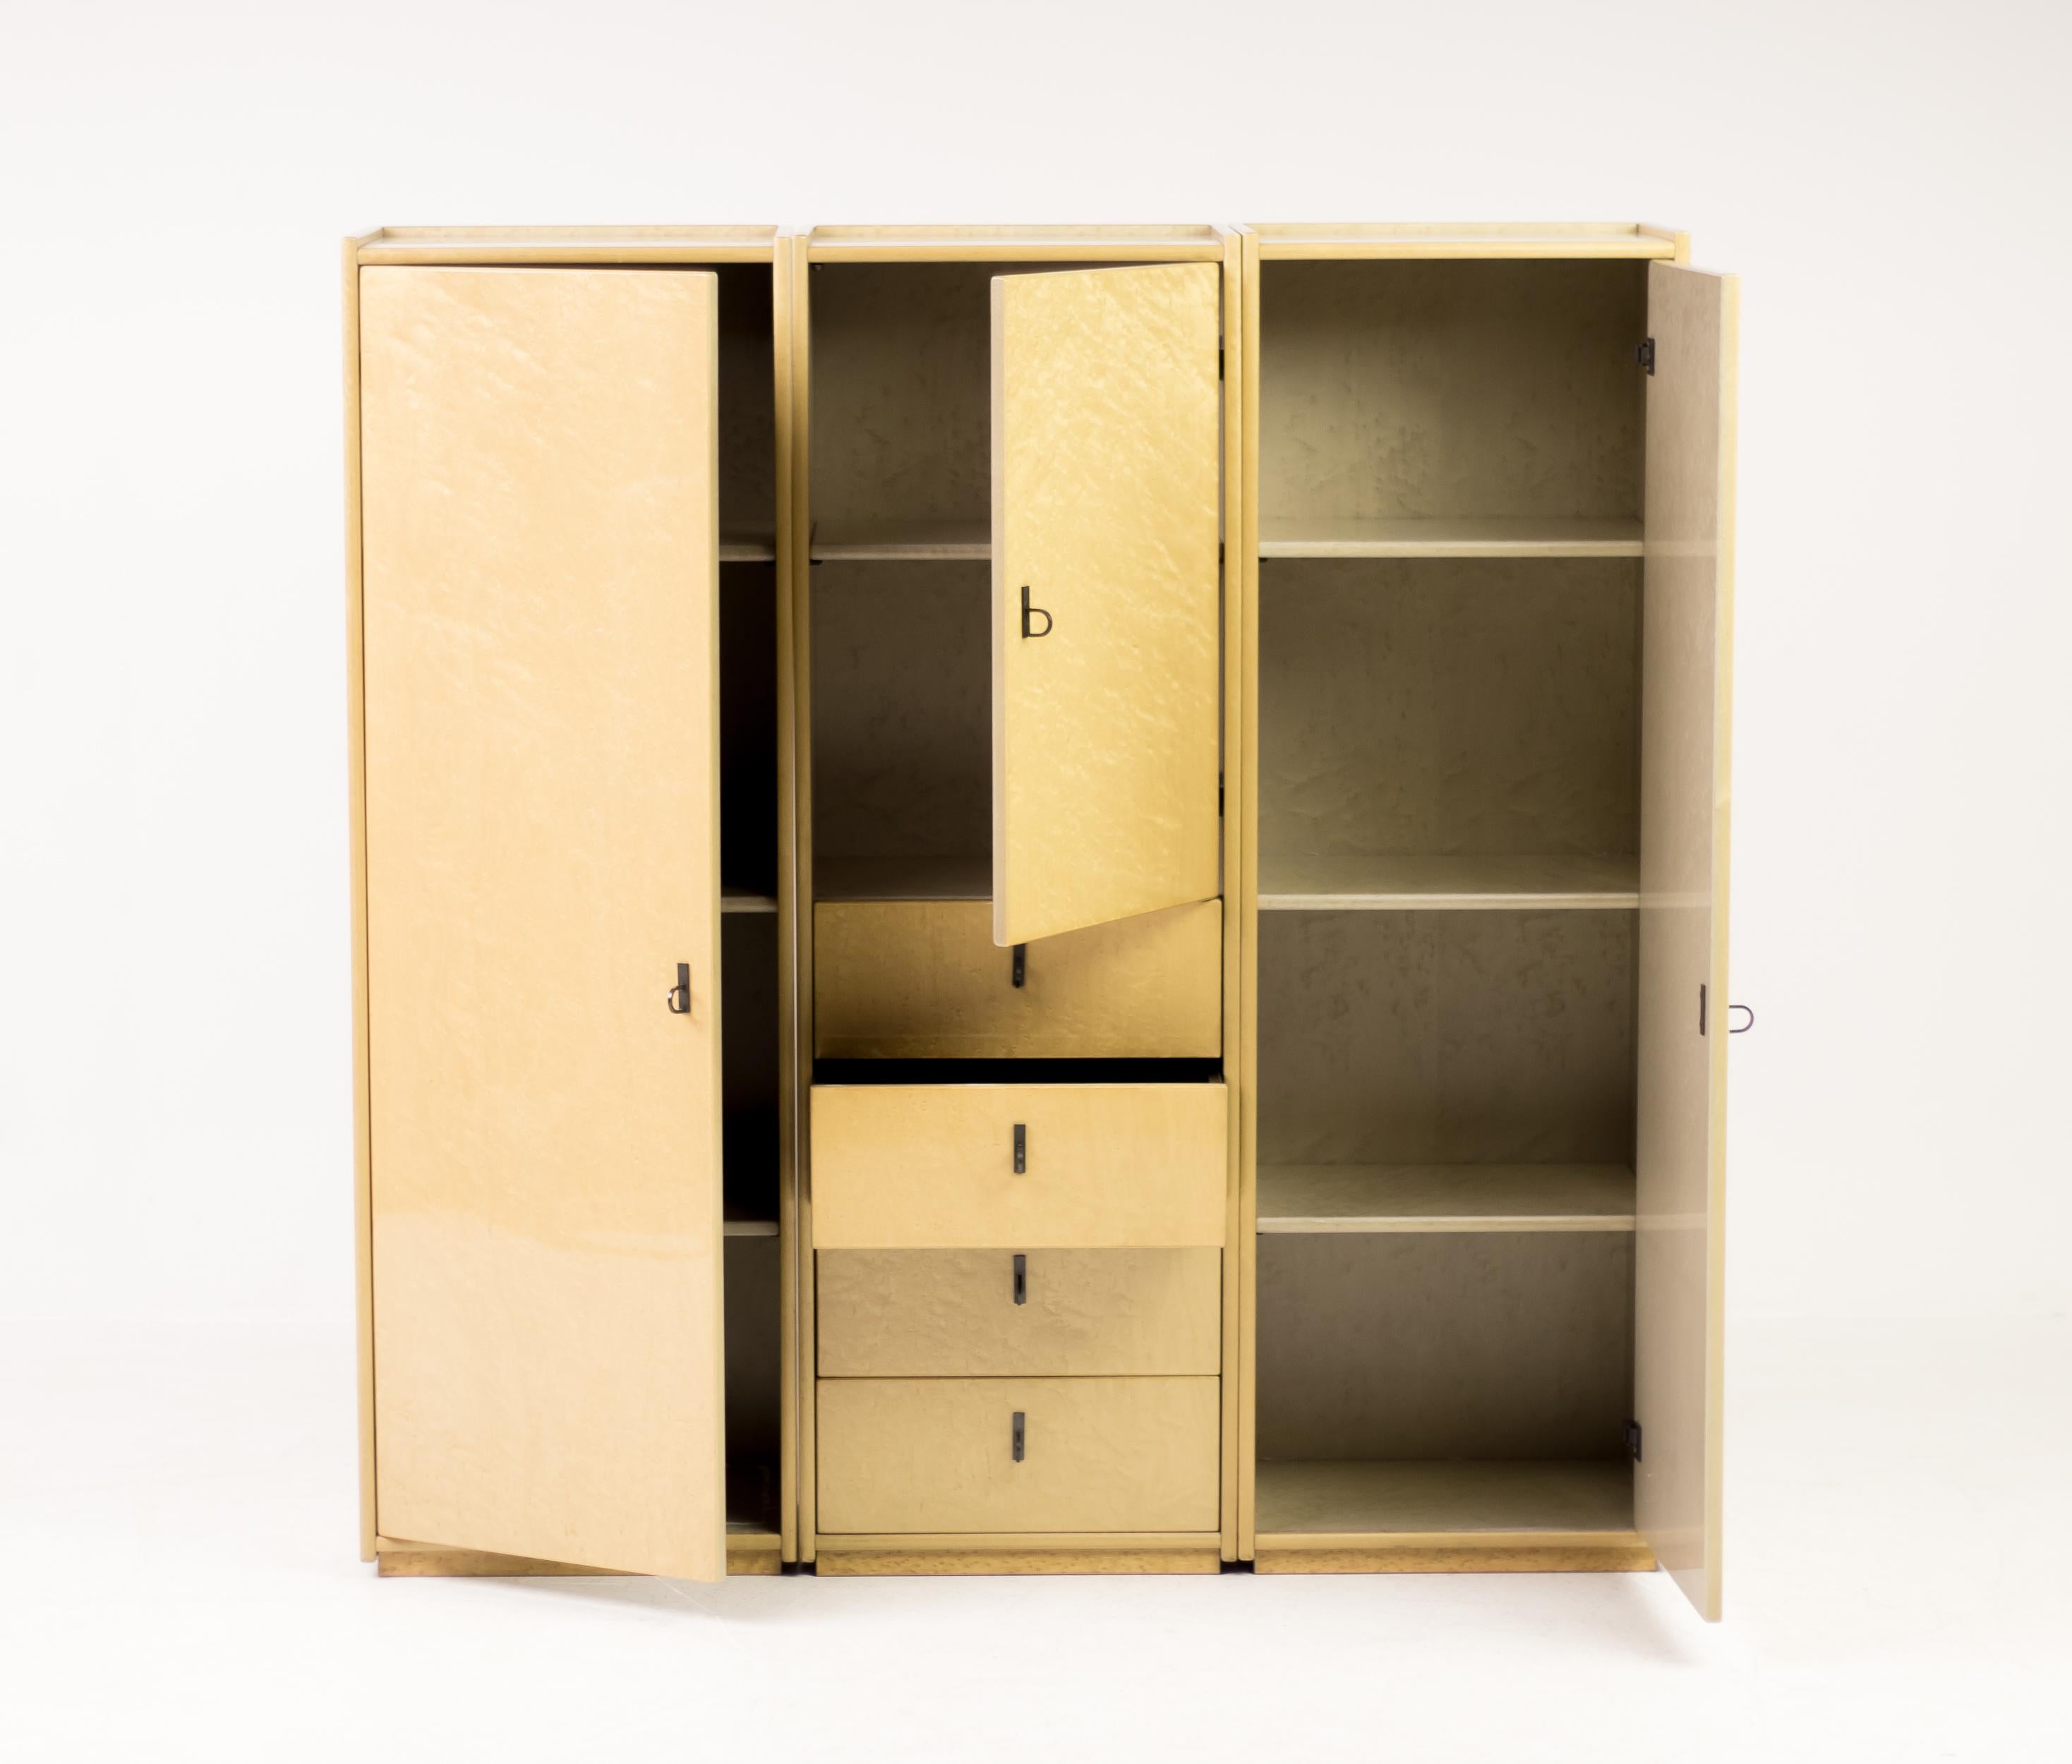 Spectacular bird's-eye maple cabinets by Saporiti Italia.
The gloss finish and sleek profile make these cabinets stand out in any setting.
With seven shelves and four roomy drawers the three cabinets feature ample storage space.
 